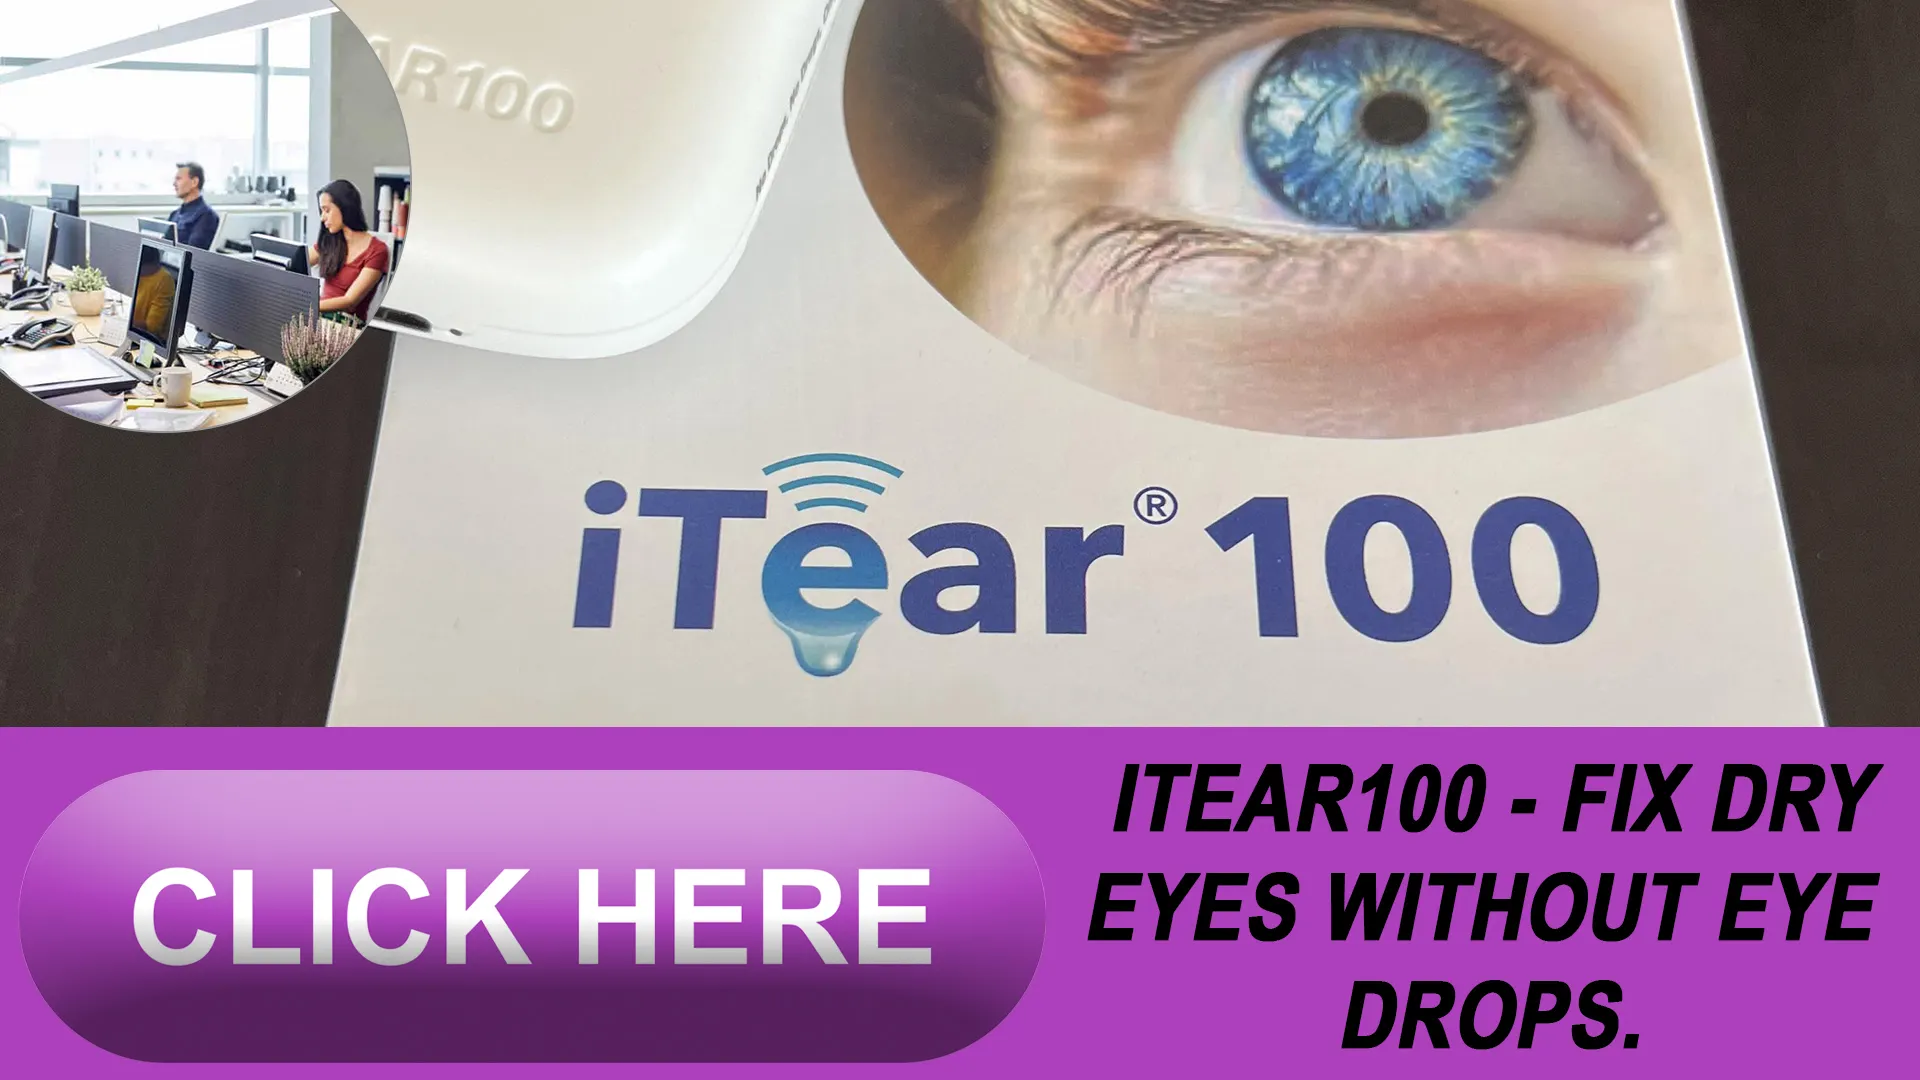 A Revolutionary Approach with the iTEAR100 Device